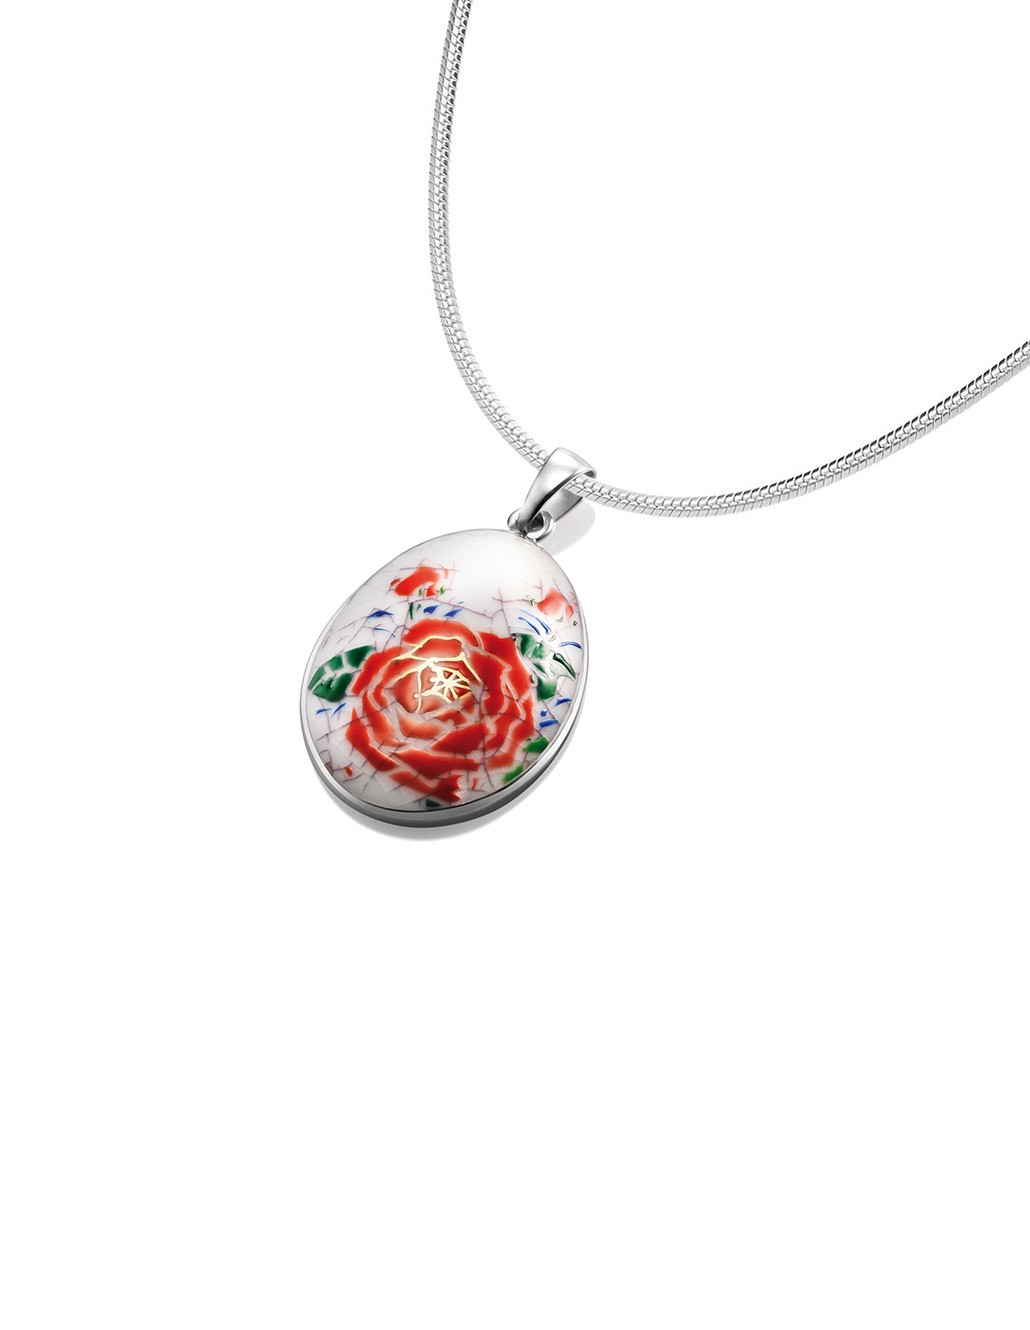 Fine China Porcelain with Red Flower in Oval Sterling Silver Pendant